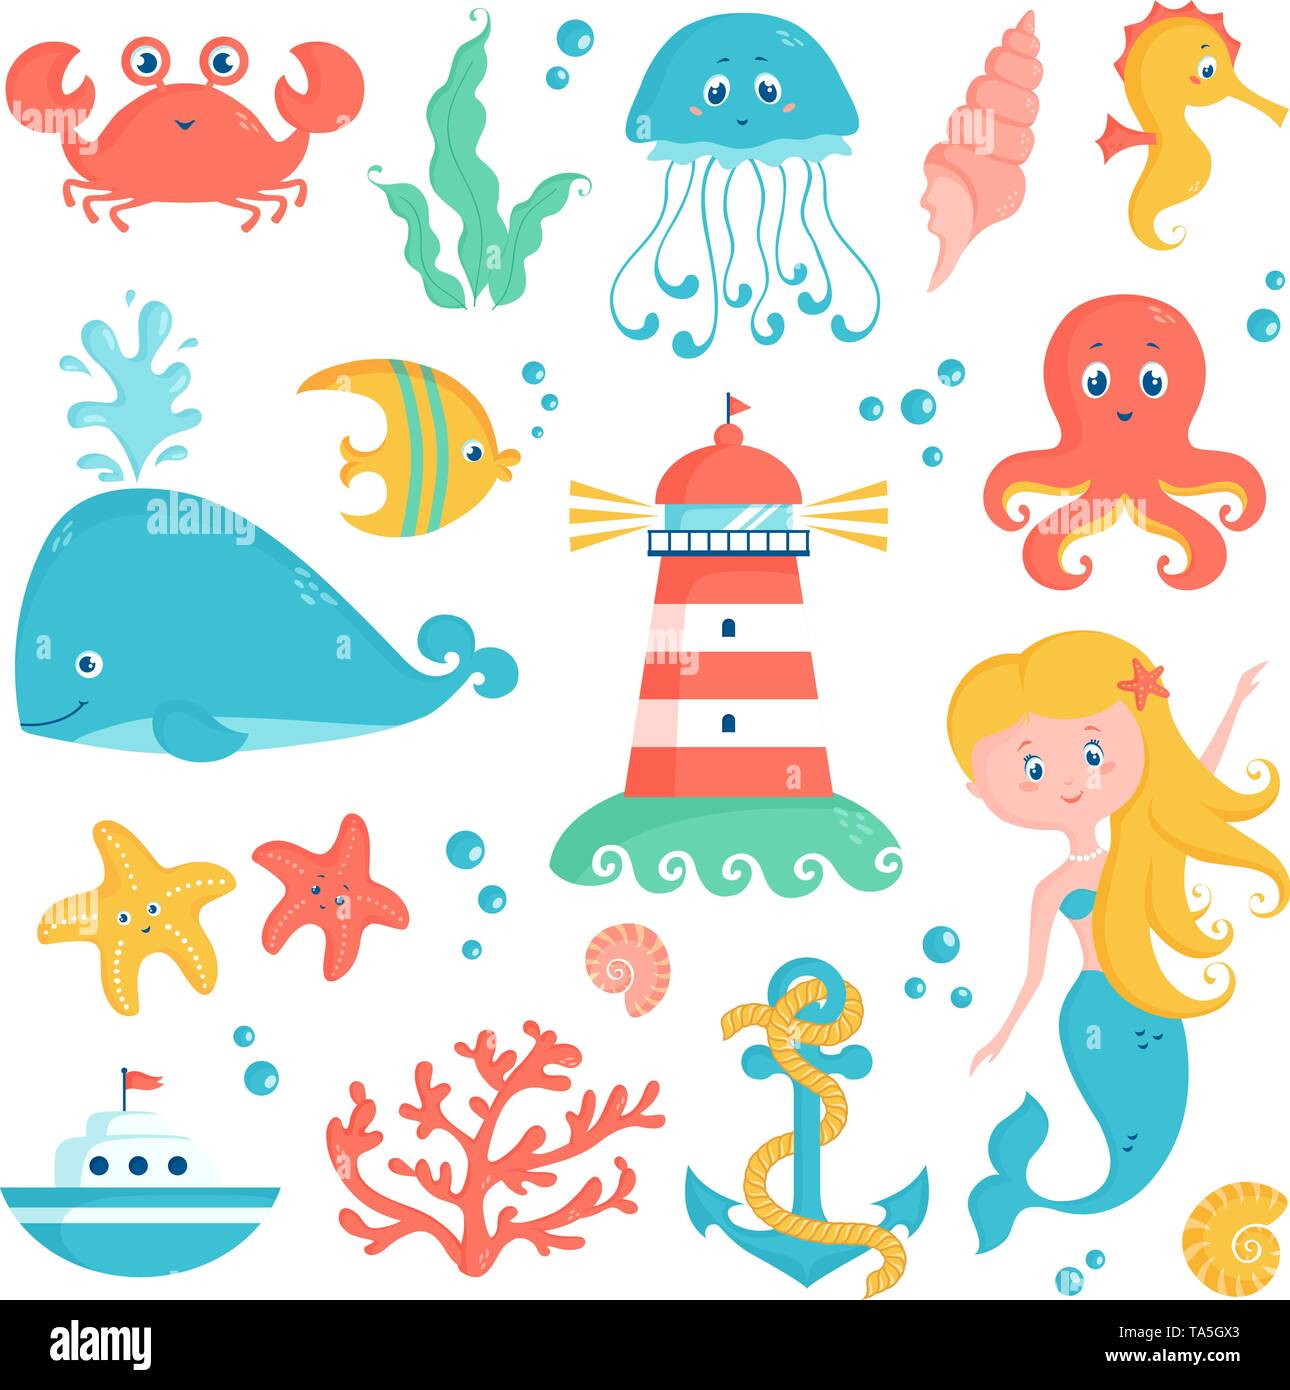 Sea animals, plants, and nautical objects - whale, seahorse, octopus, coral, lighthouse, anchor and other marine symbols. Set of cute vector elements. Stock Vector